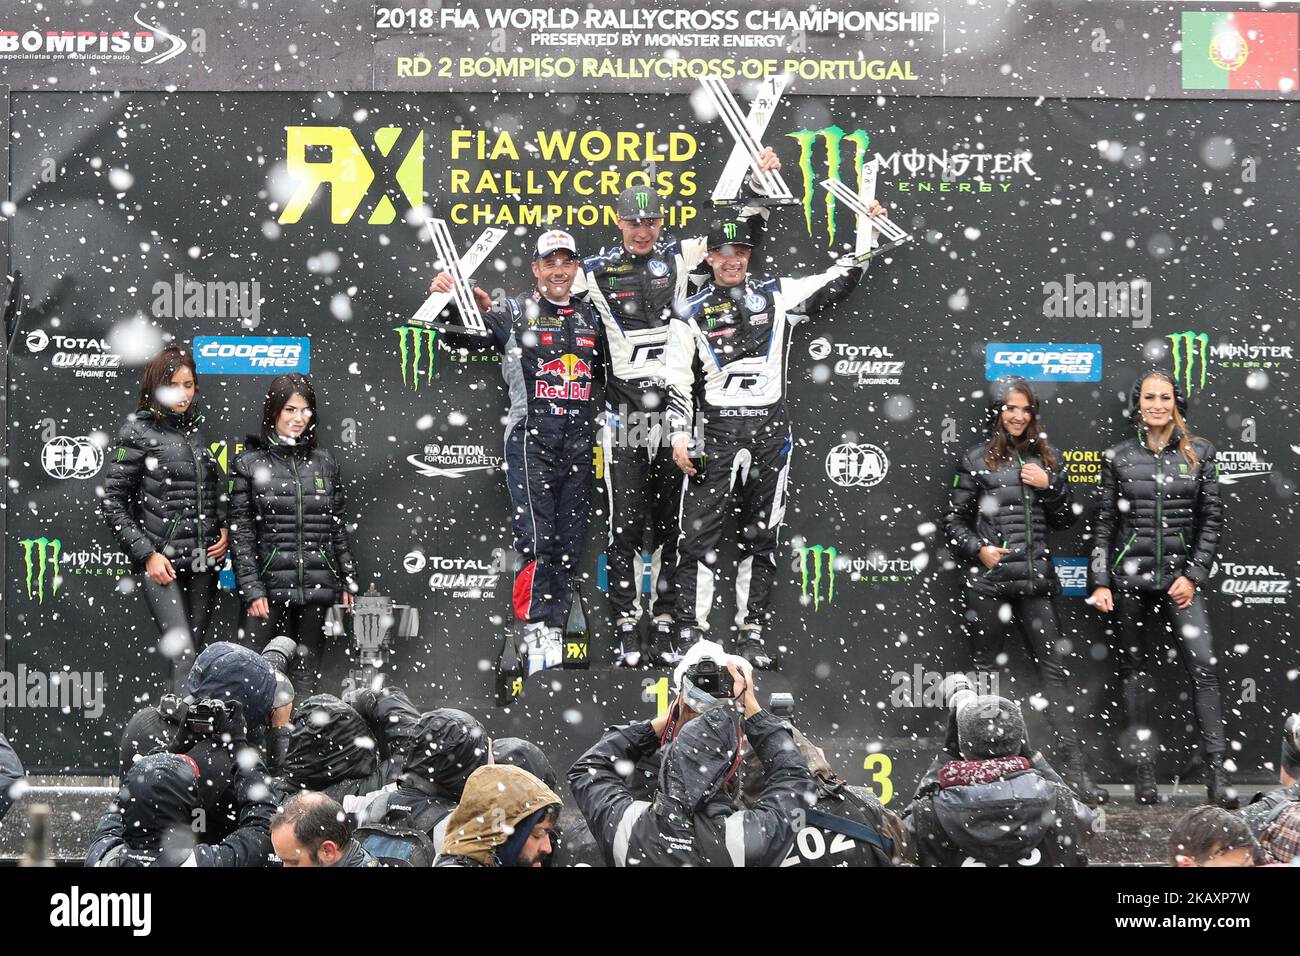 Johan KRISTOFFERSSON winner of race (C), Sebastien LOEB (L) and Petter SOLBERG (R) in Podium Ceremony during the World RX of Portugal 2018, at Montalegre International Circuit, on April 29, 2018 in Montalegre, Portugal. (Photo by Paulo Oliveira / DPI / NurPhoto) Stock Photo